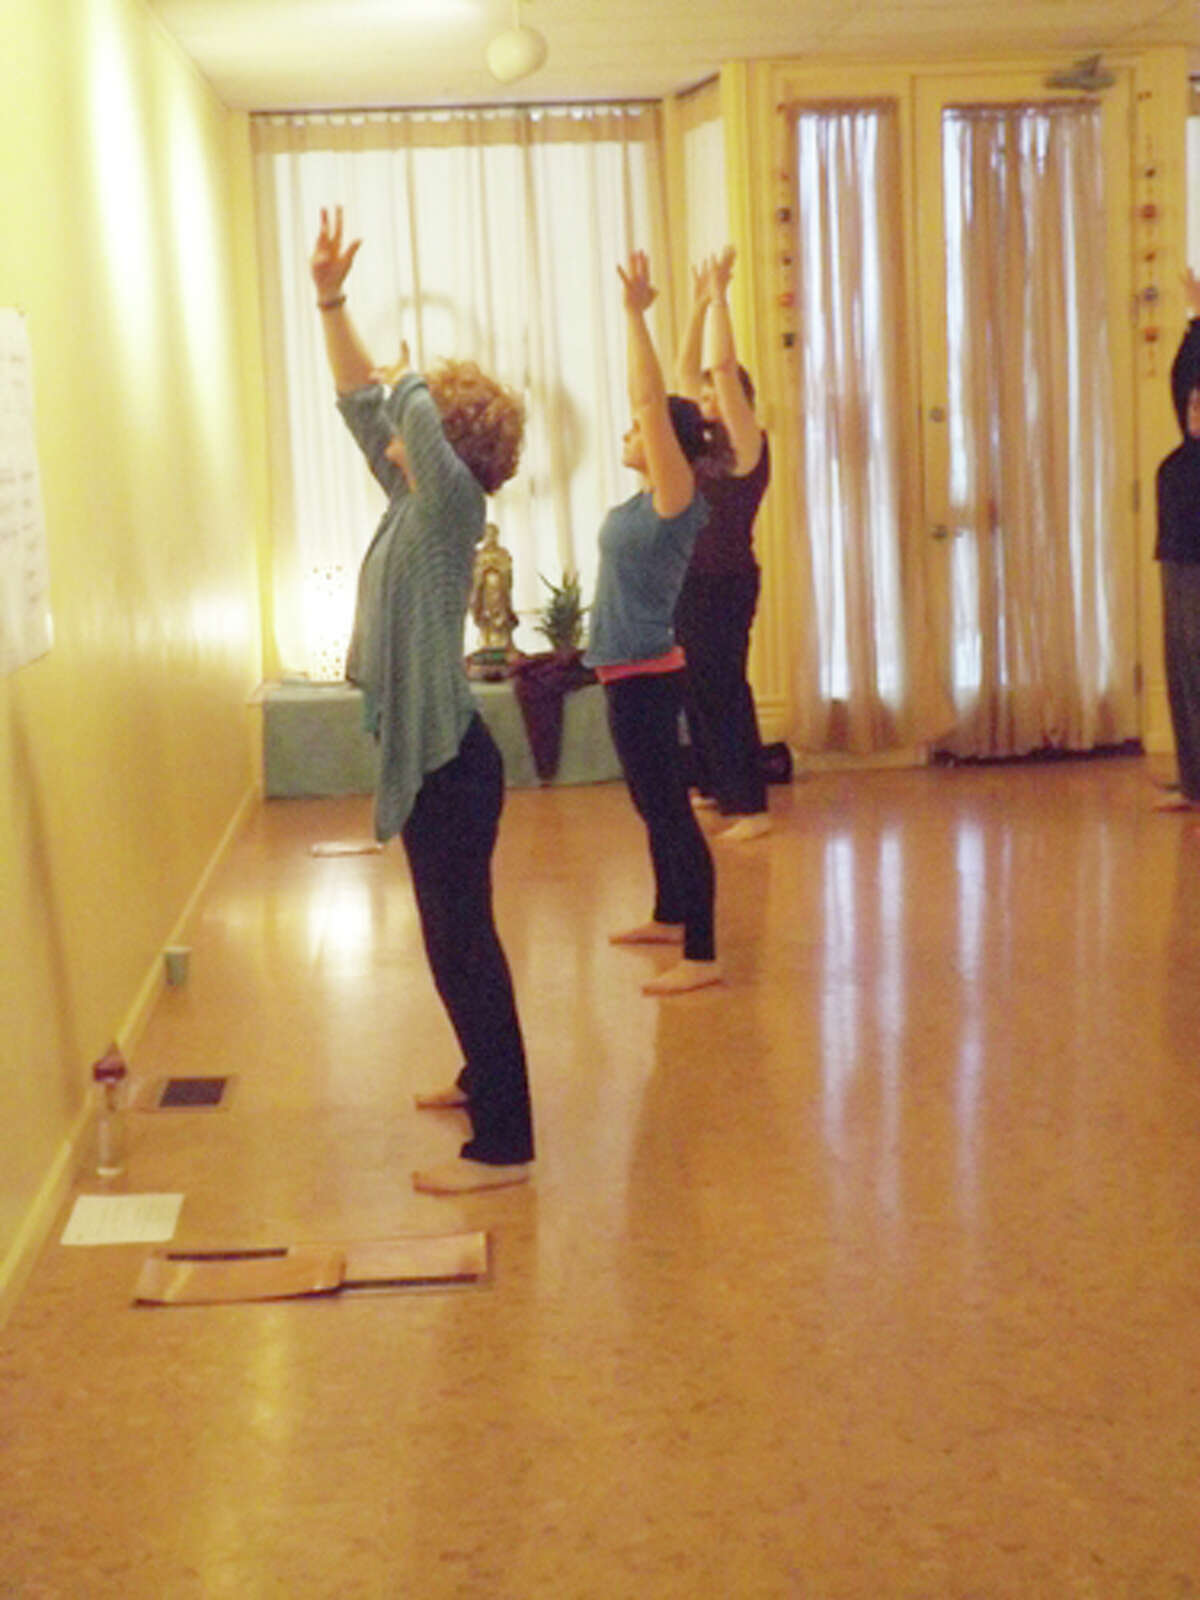 FESTIVAL YOGA: Lisa Sandin, Shelby Austin and Pat Barrett begin a session of Nia movement.The Nia class reach and stretch at the start of a movement session. The yoga event Monday was part of the 2014 Festival of the Arts.